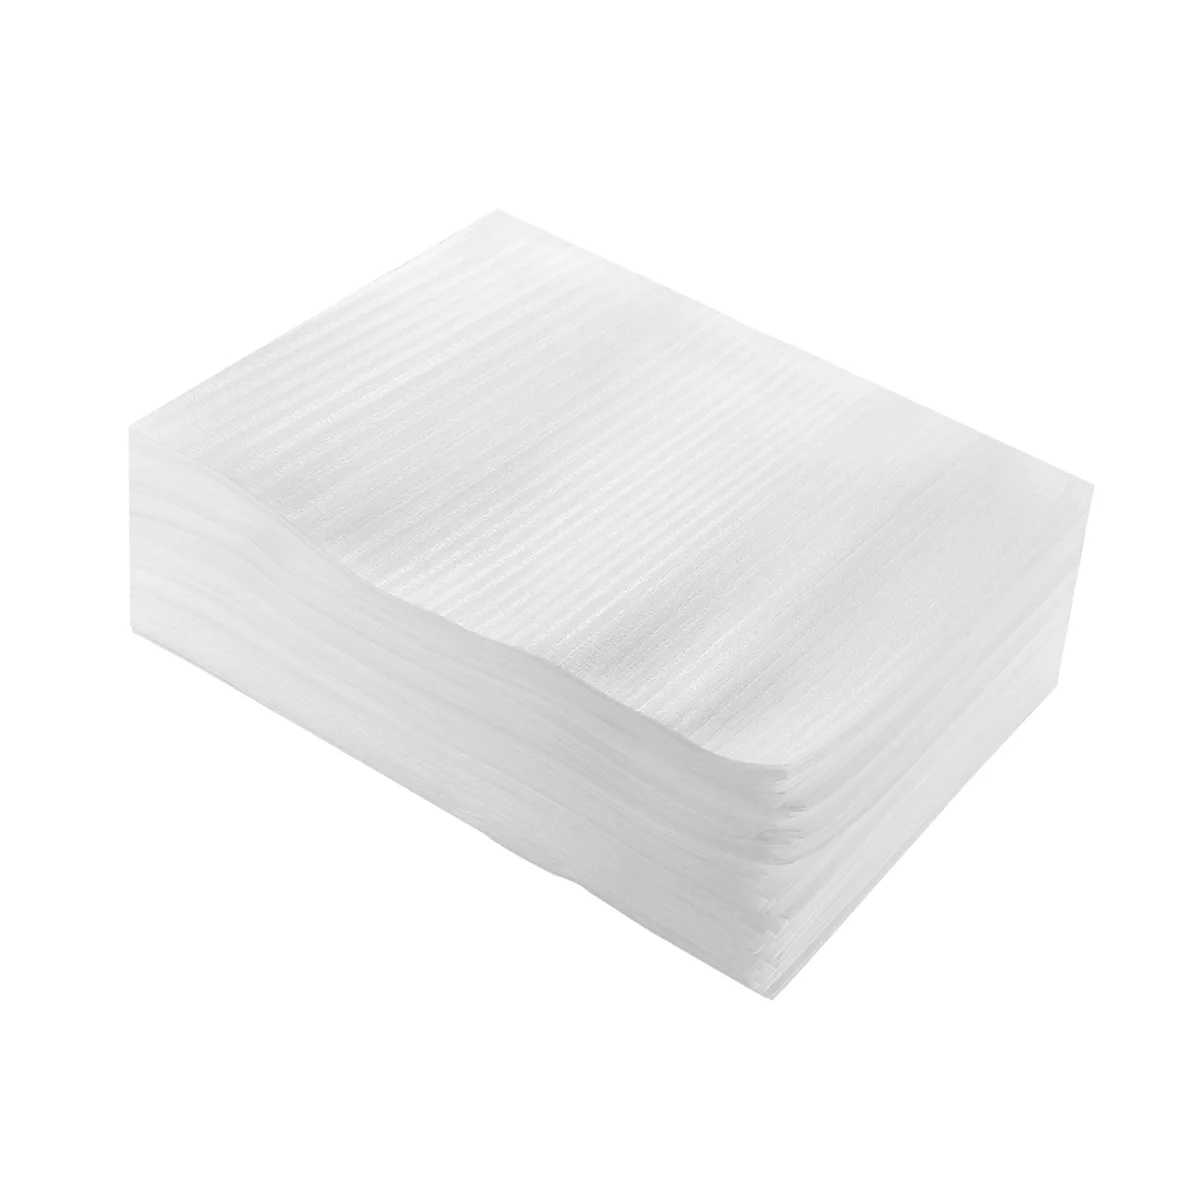 

Cushion Foam Pouches Packing Wrapping Sheets Cushioning Padding Supplies Moving Glasses Dishes